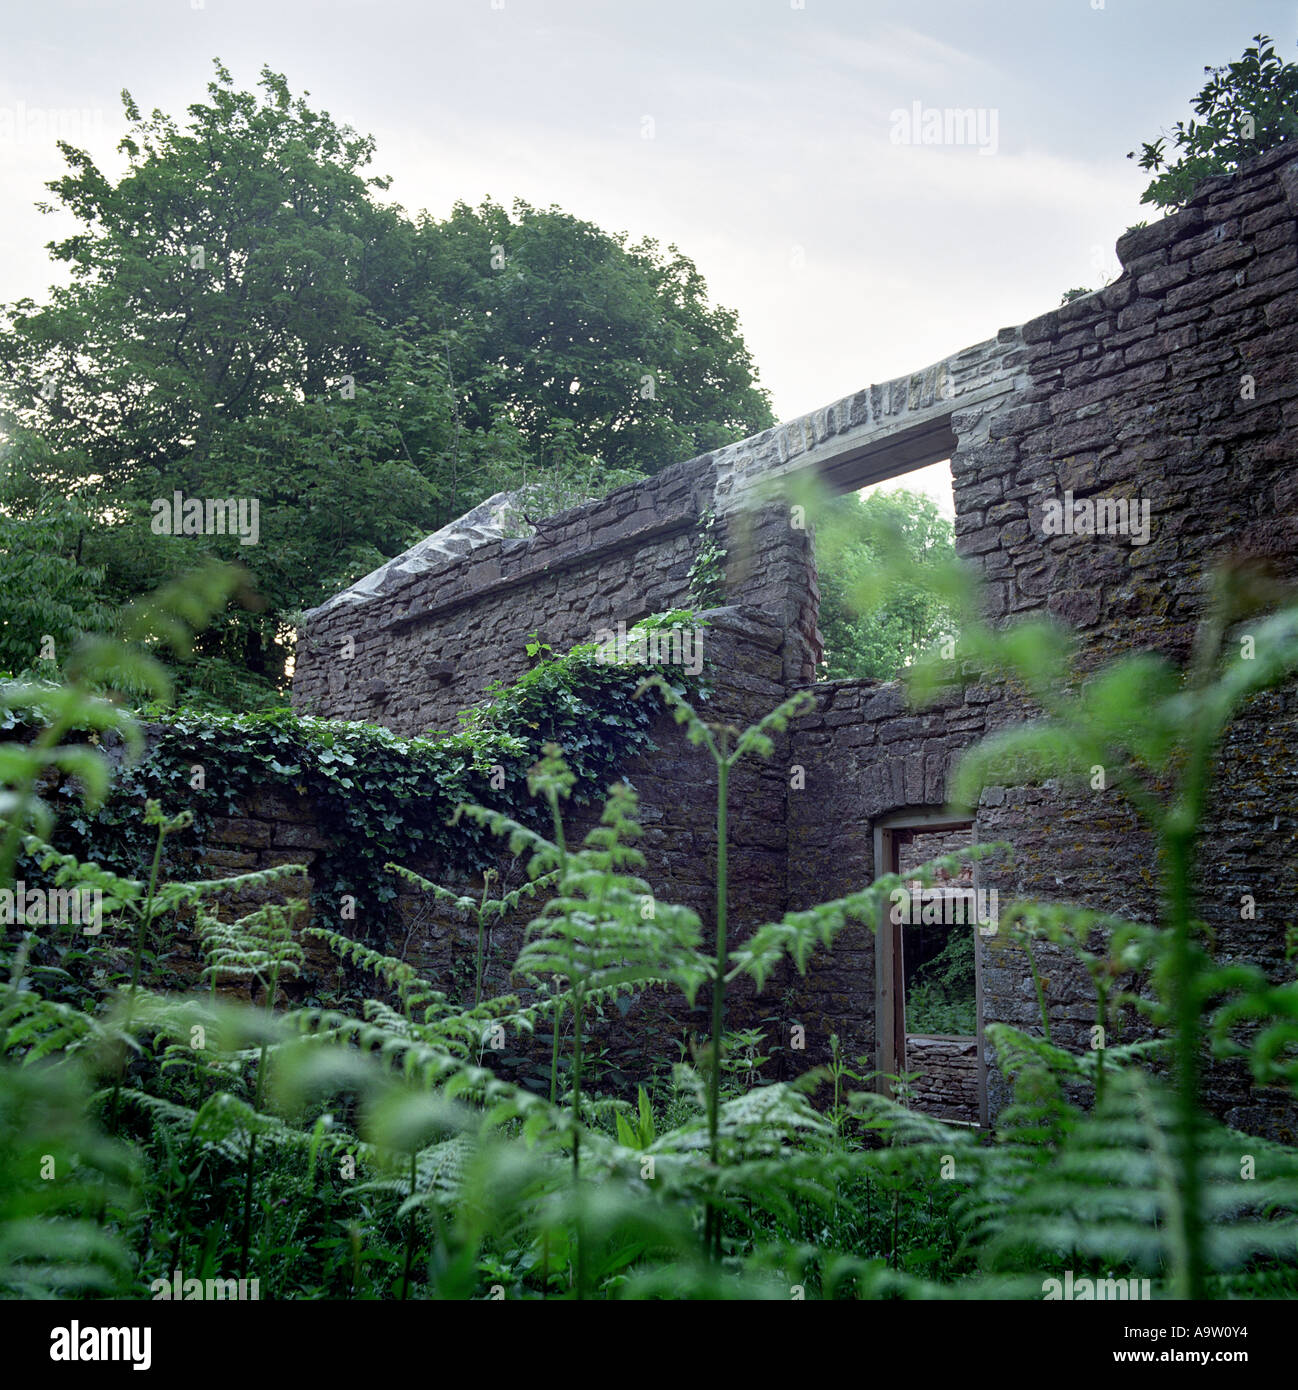 Ivy and bracken grow over an abandoned building in the village of Tyneham, Dorest, commandeered by the army during WWII. Stock Photo